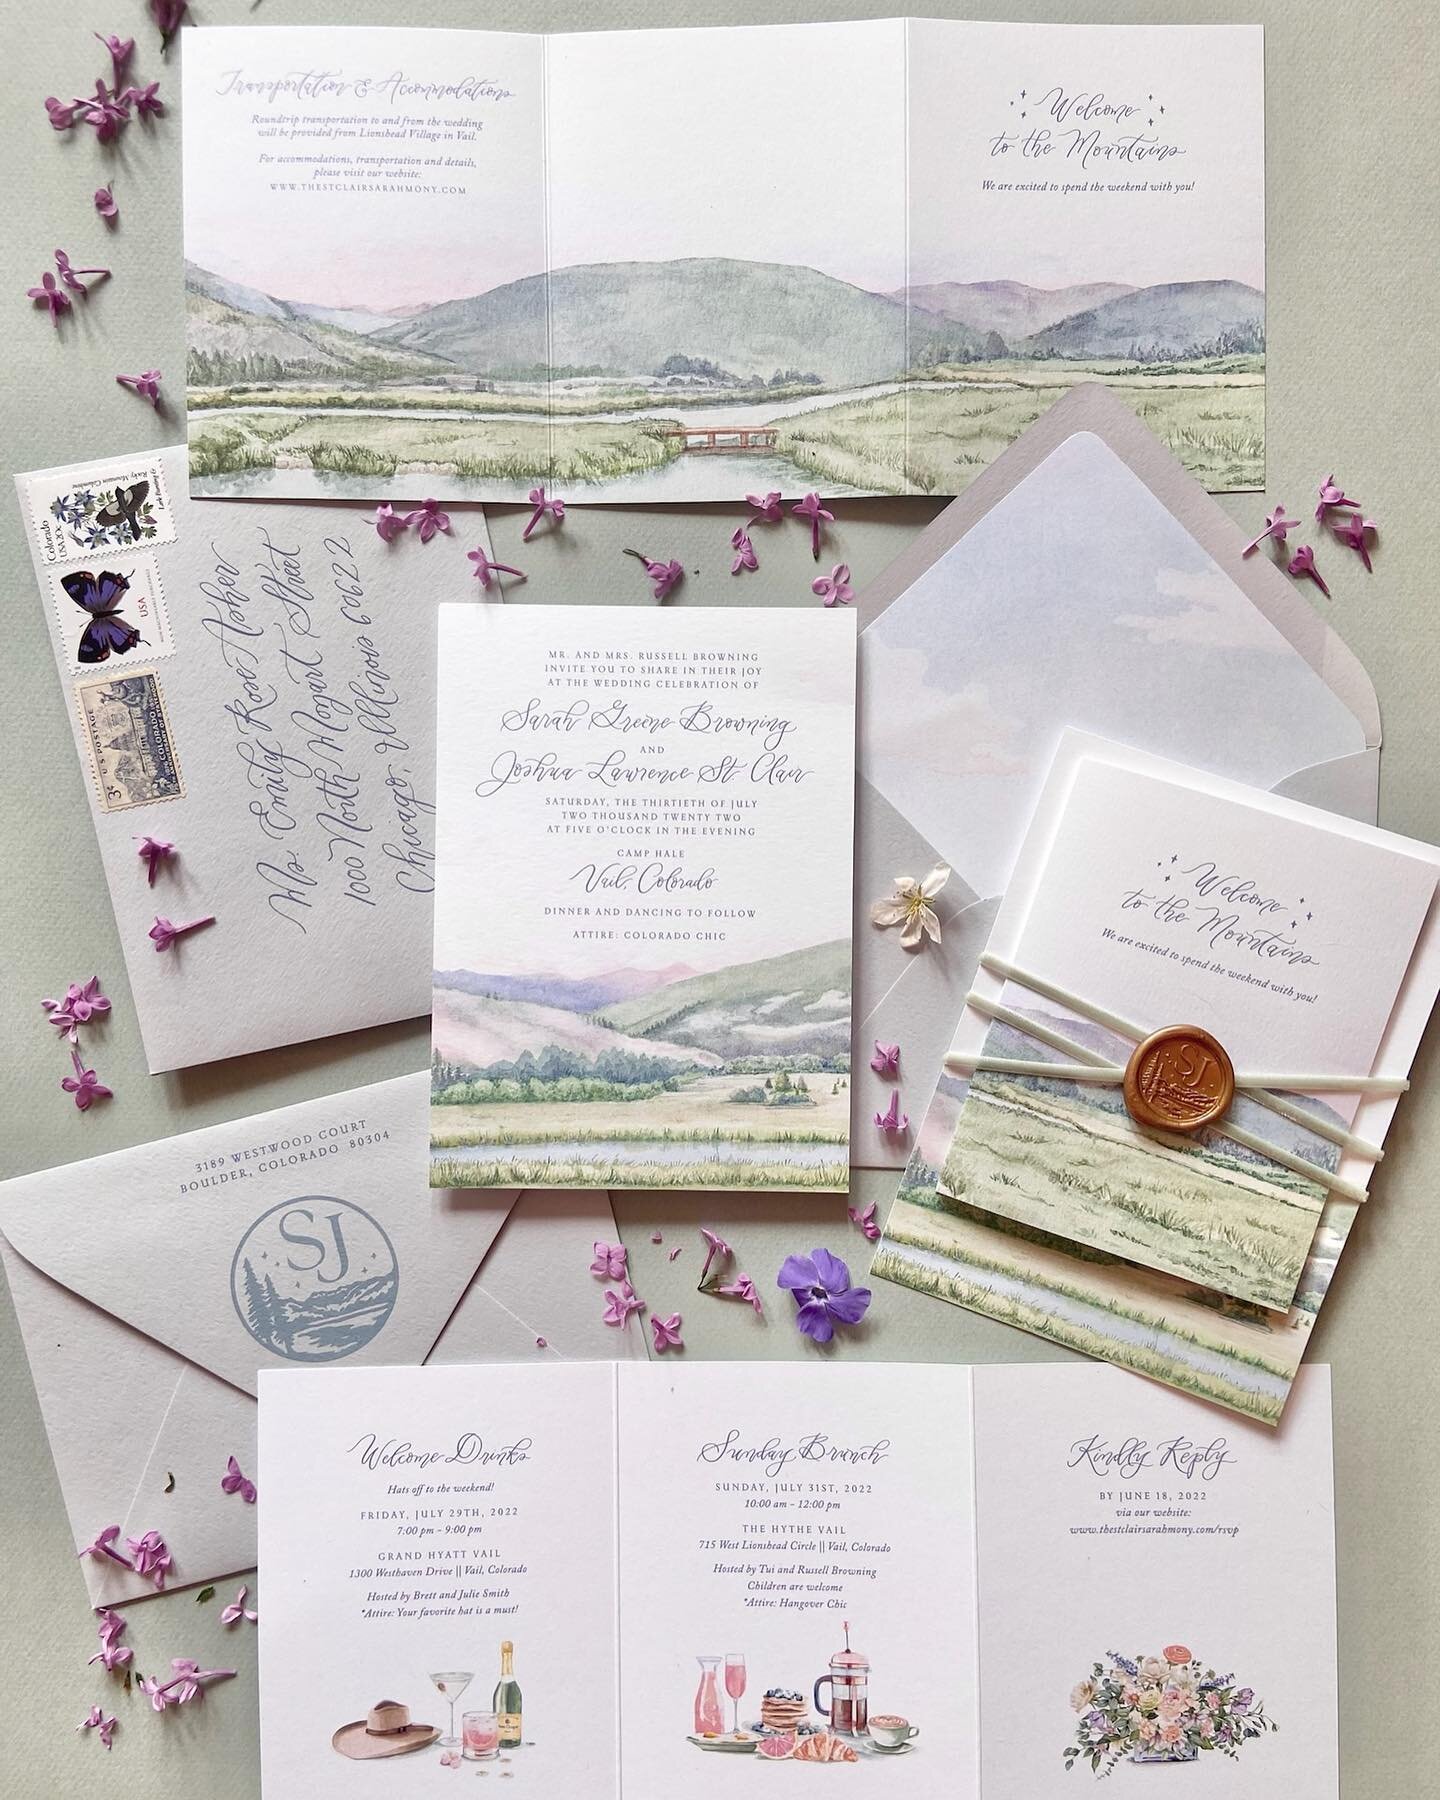 Happy wedding day to Sarah and Josh! We had the best time working with @whimevents on their stationery (seriously, Natalie is so organized, sweet, and down-to-earth, and their style guide had us excited about this project from day 1); we work almost 